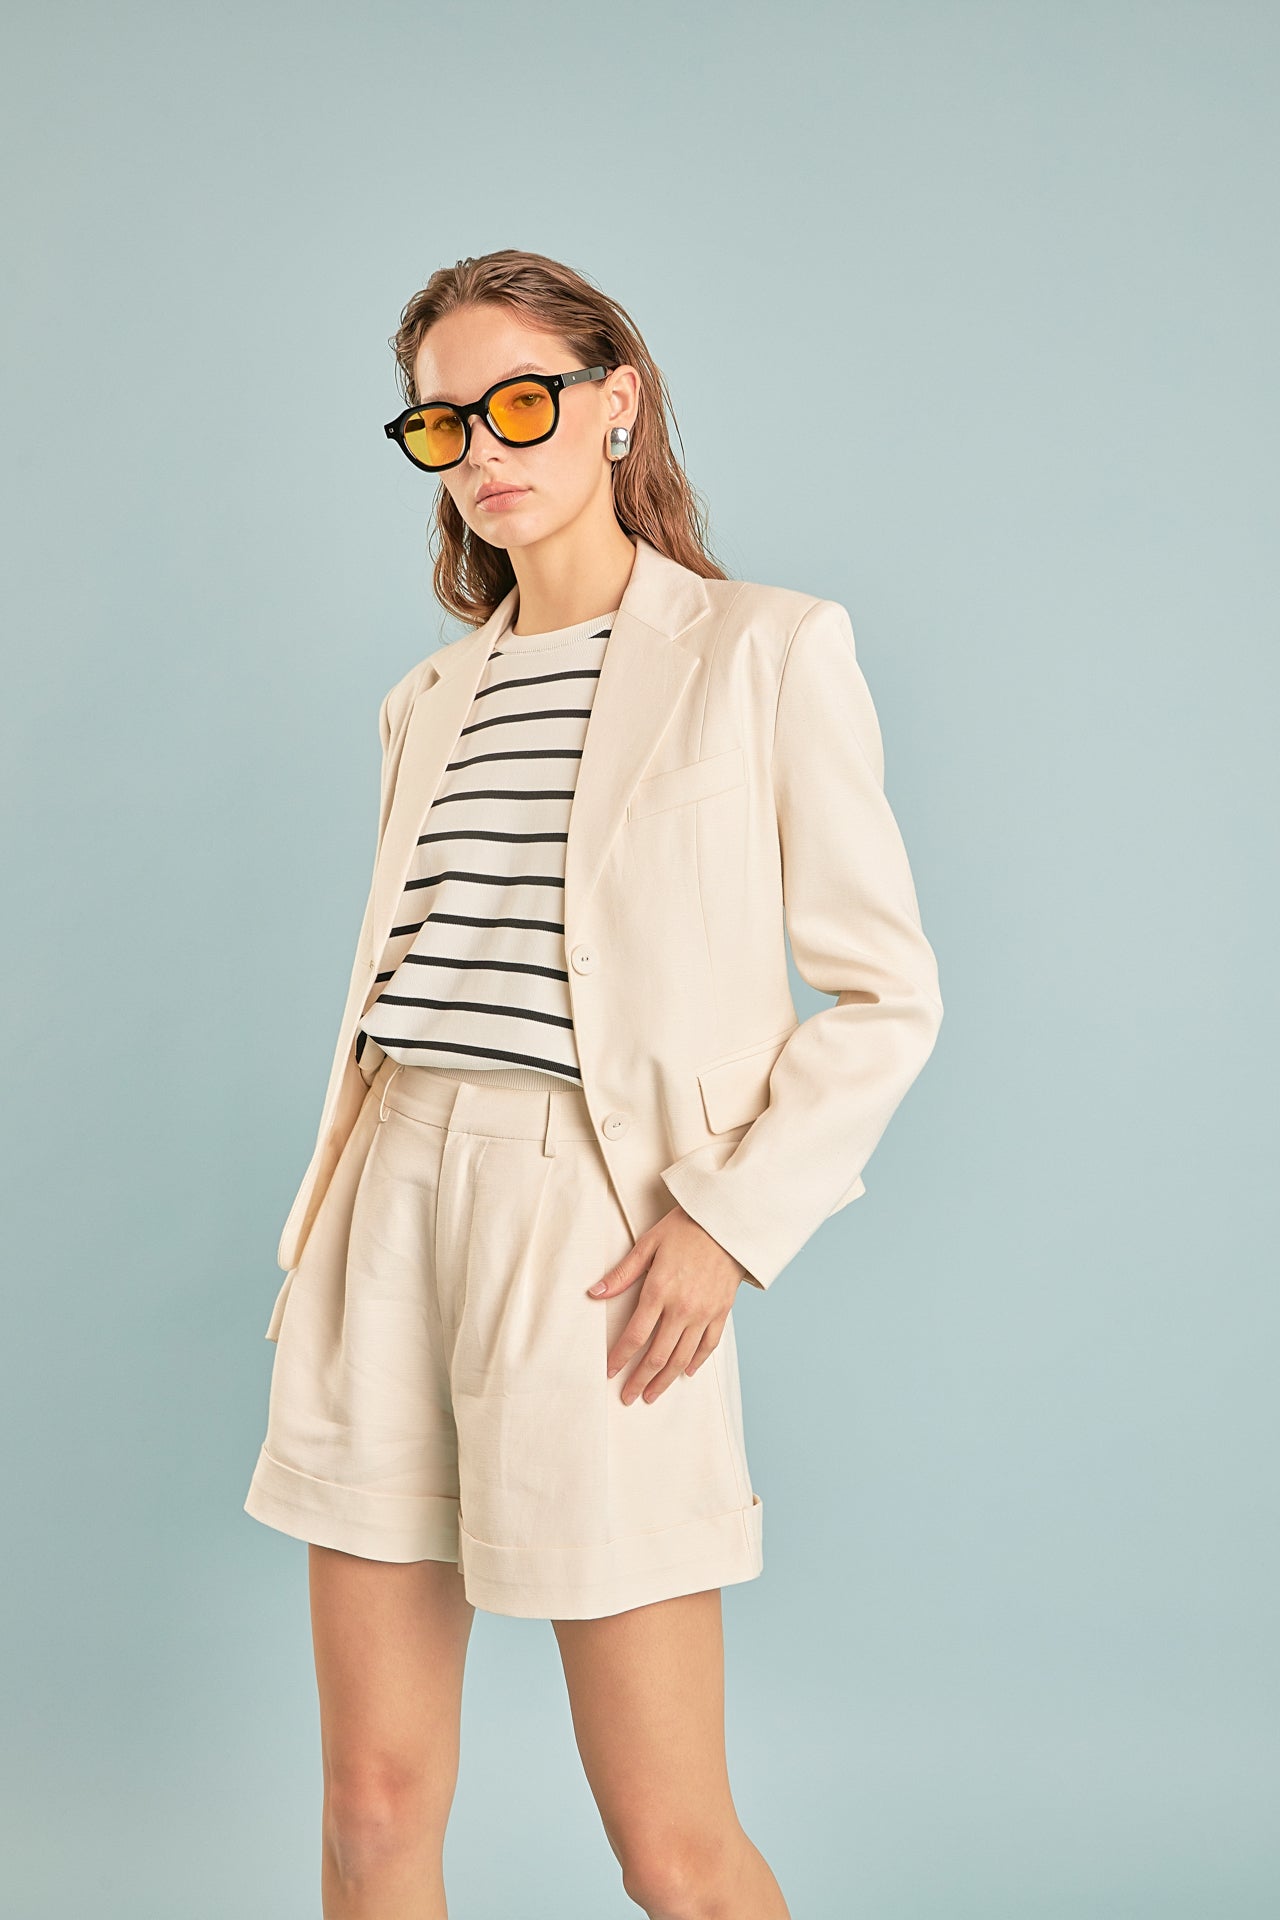 Strip Sleeveless Pleated Knit Top, Linen Two Buttoned Blazer, and Linen Pintucked Shorts from Endless Rose